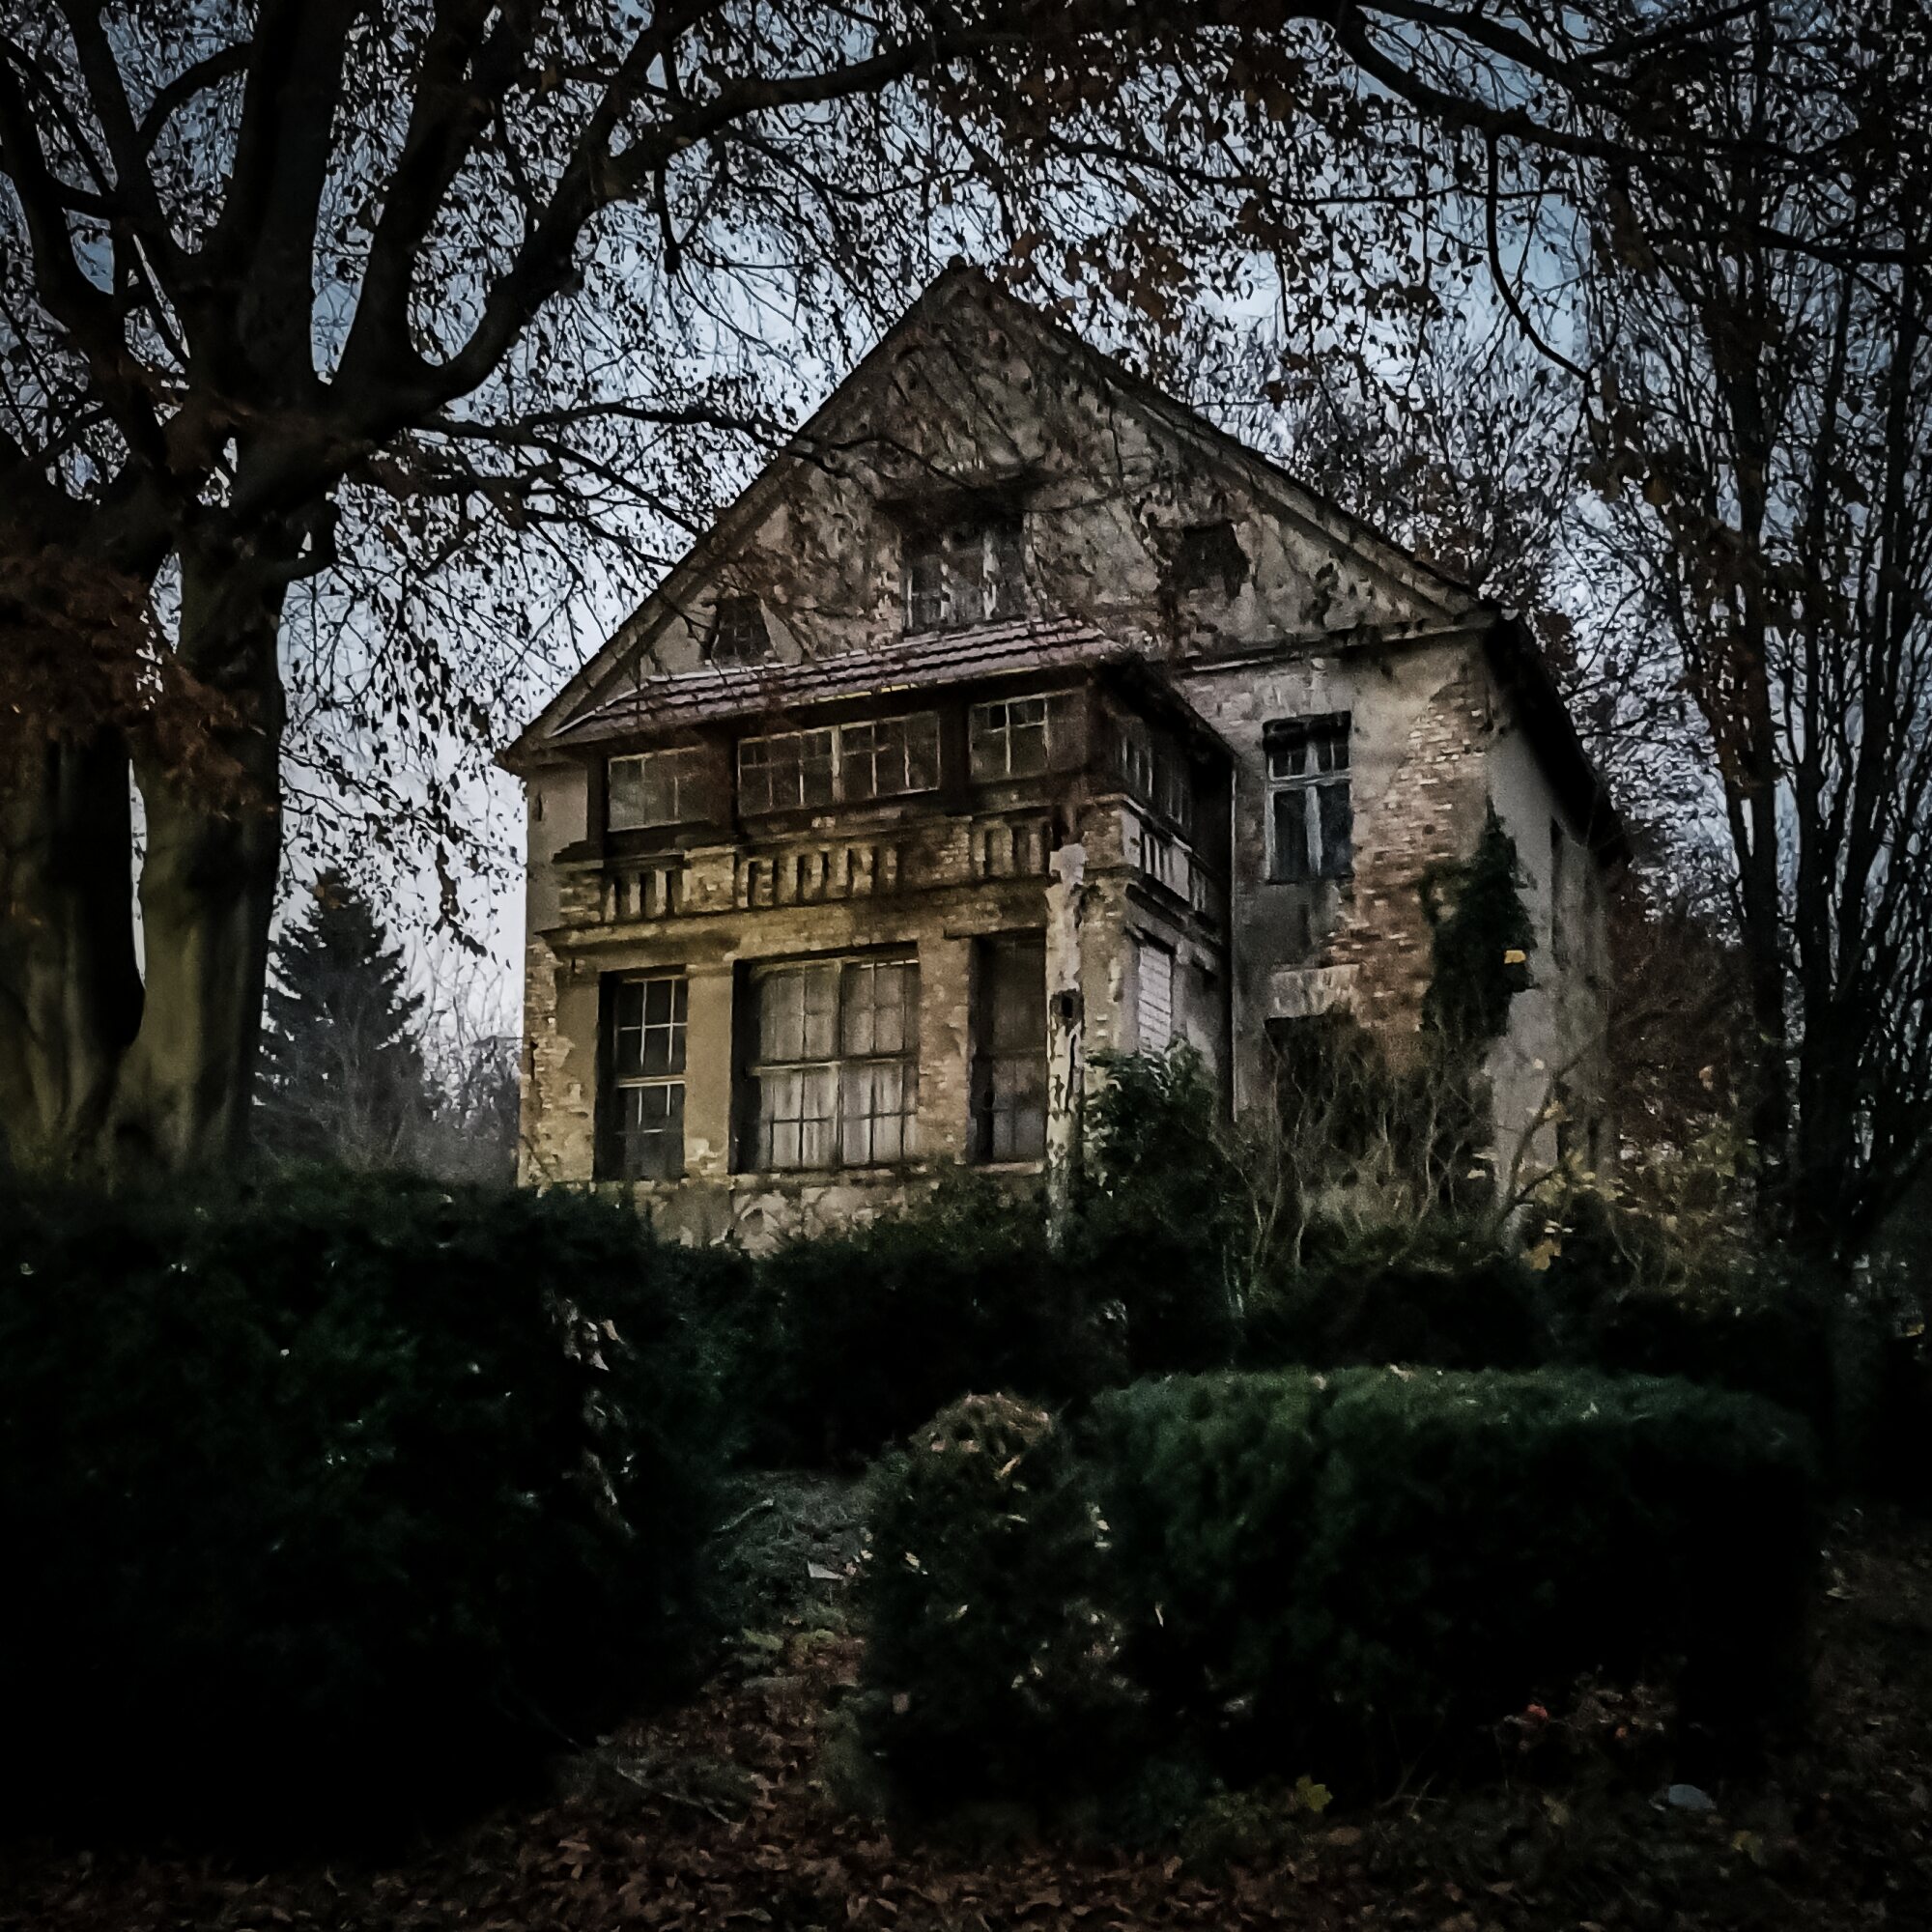 The Ghost house